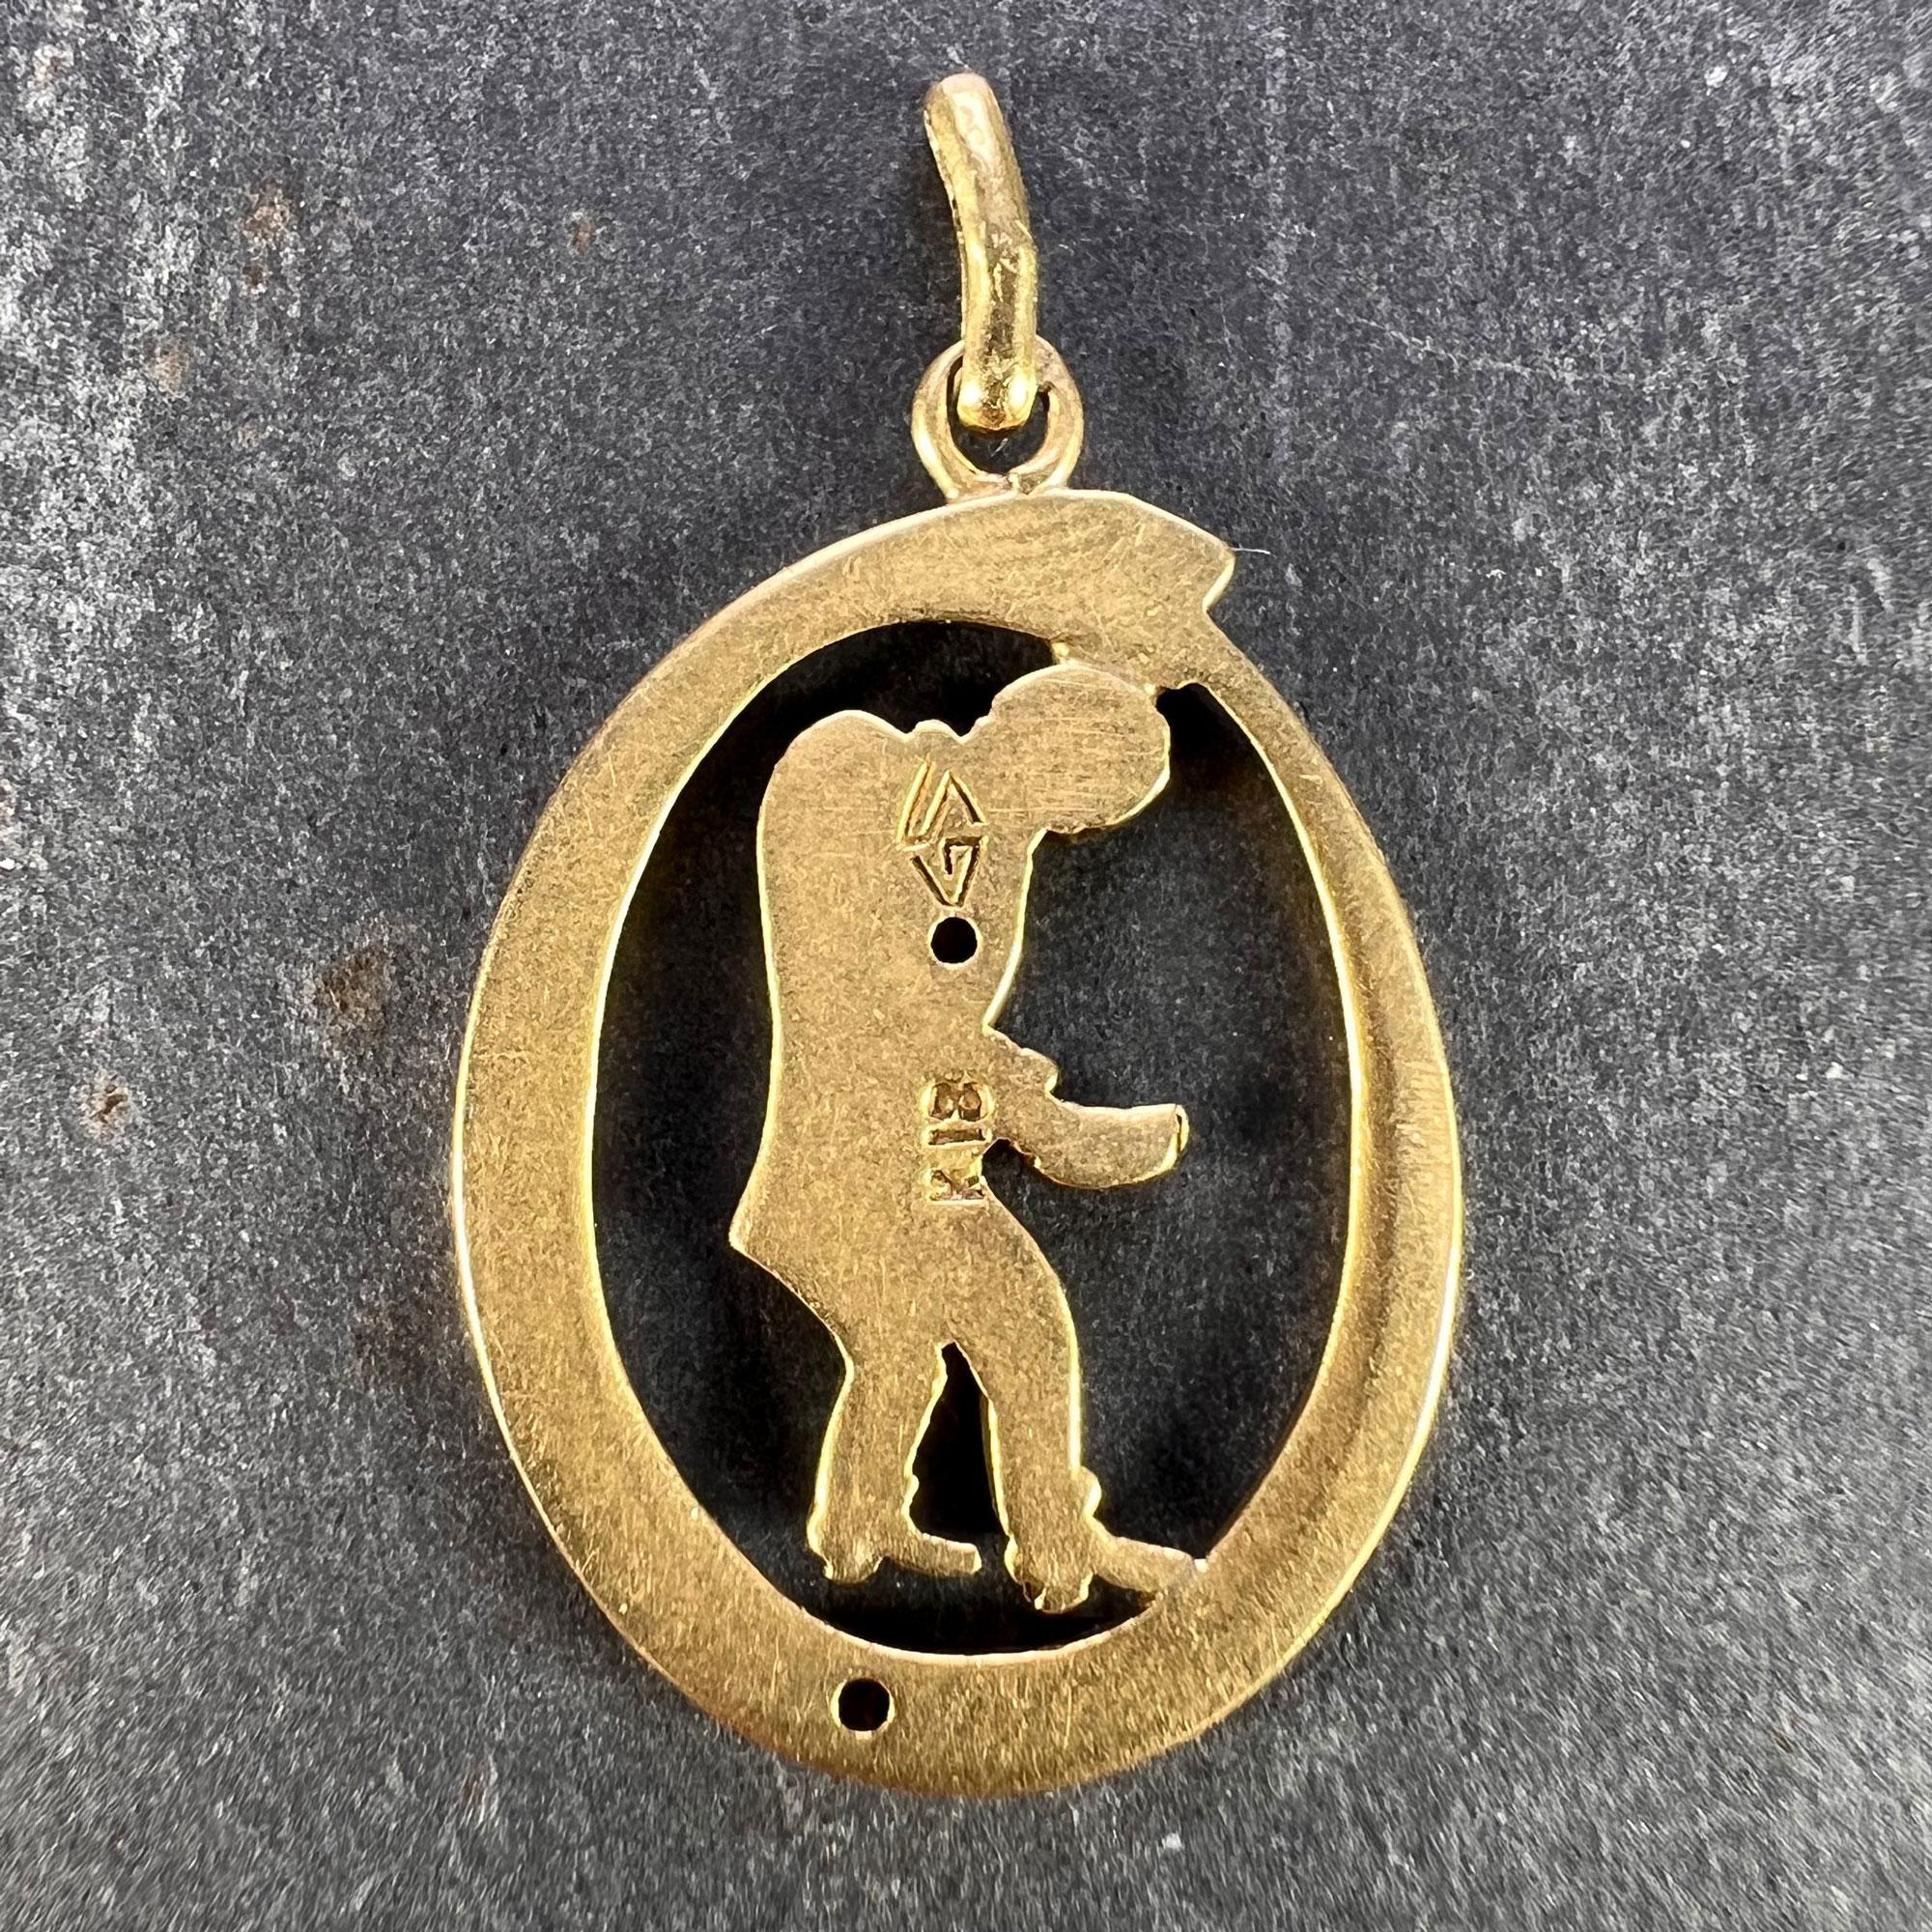 Ouroboros Serpent Snake Man 18K Yellow Gold Enamel Charm Pendant In Good Condition For Sale In London, GB